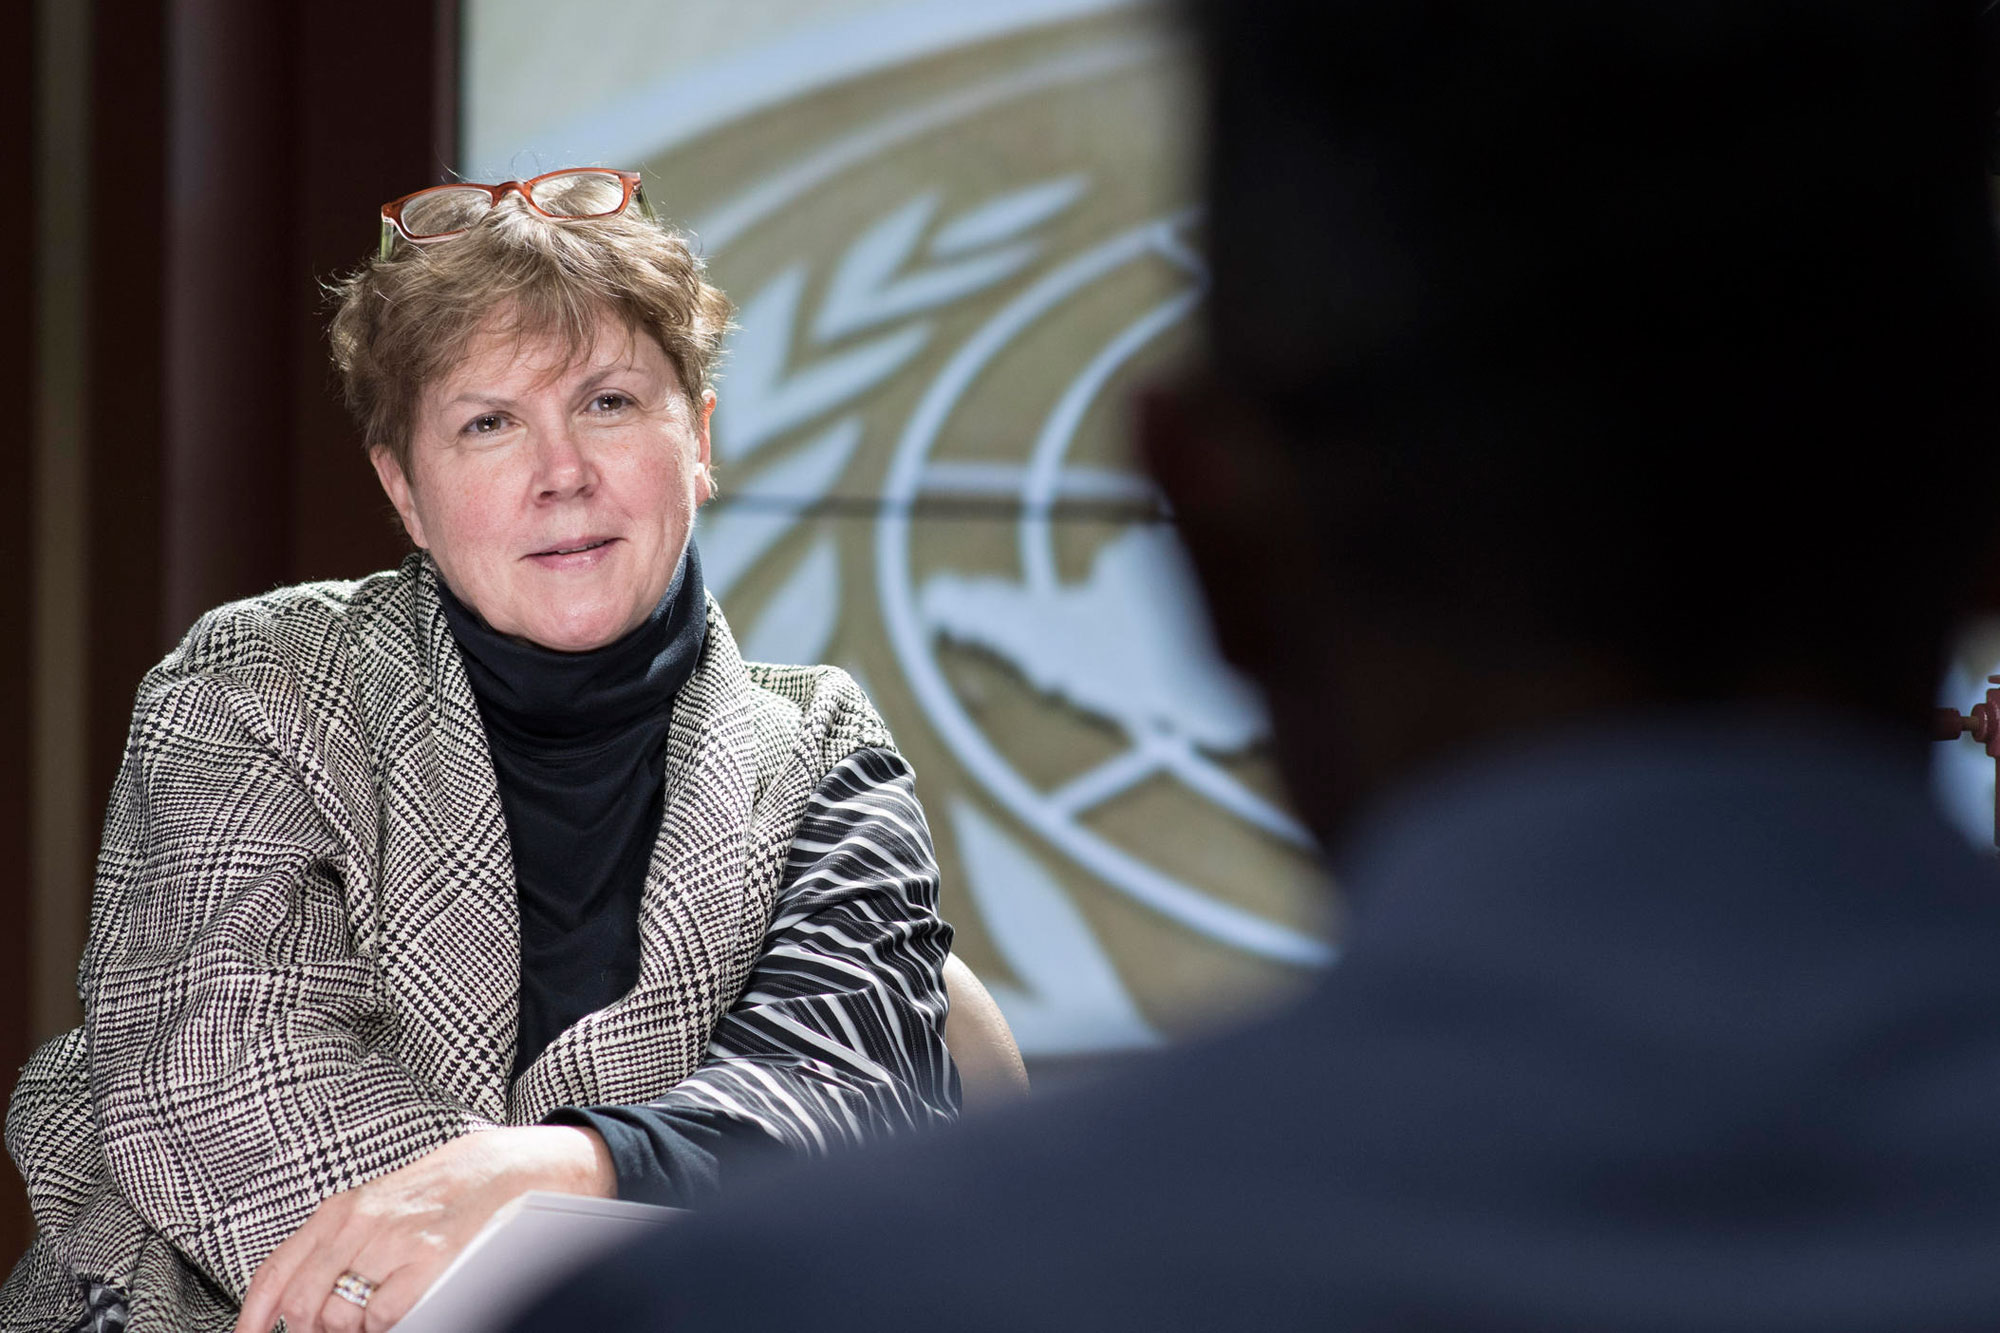 Jane Holl Lute, Special Coordinator on improving the United Nations response to sexual exploitation and abuse, gives an interview for the UN News and Media Division